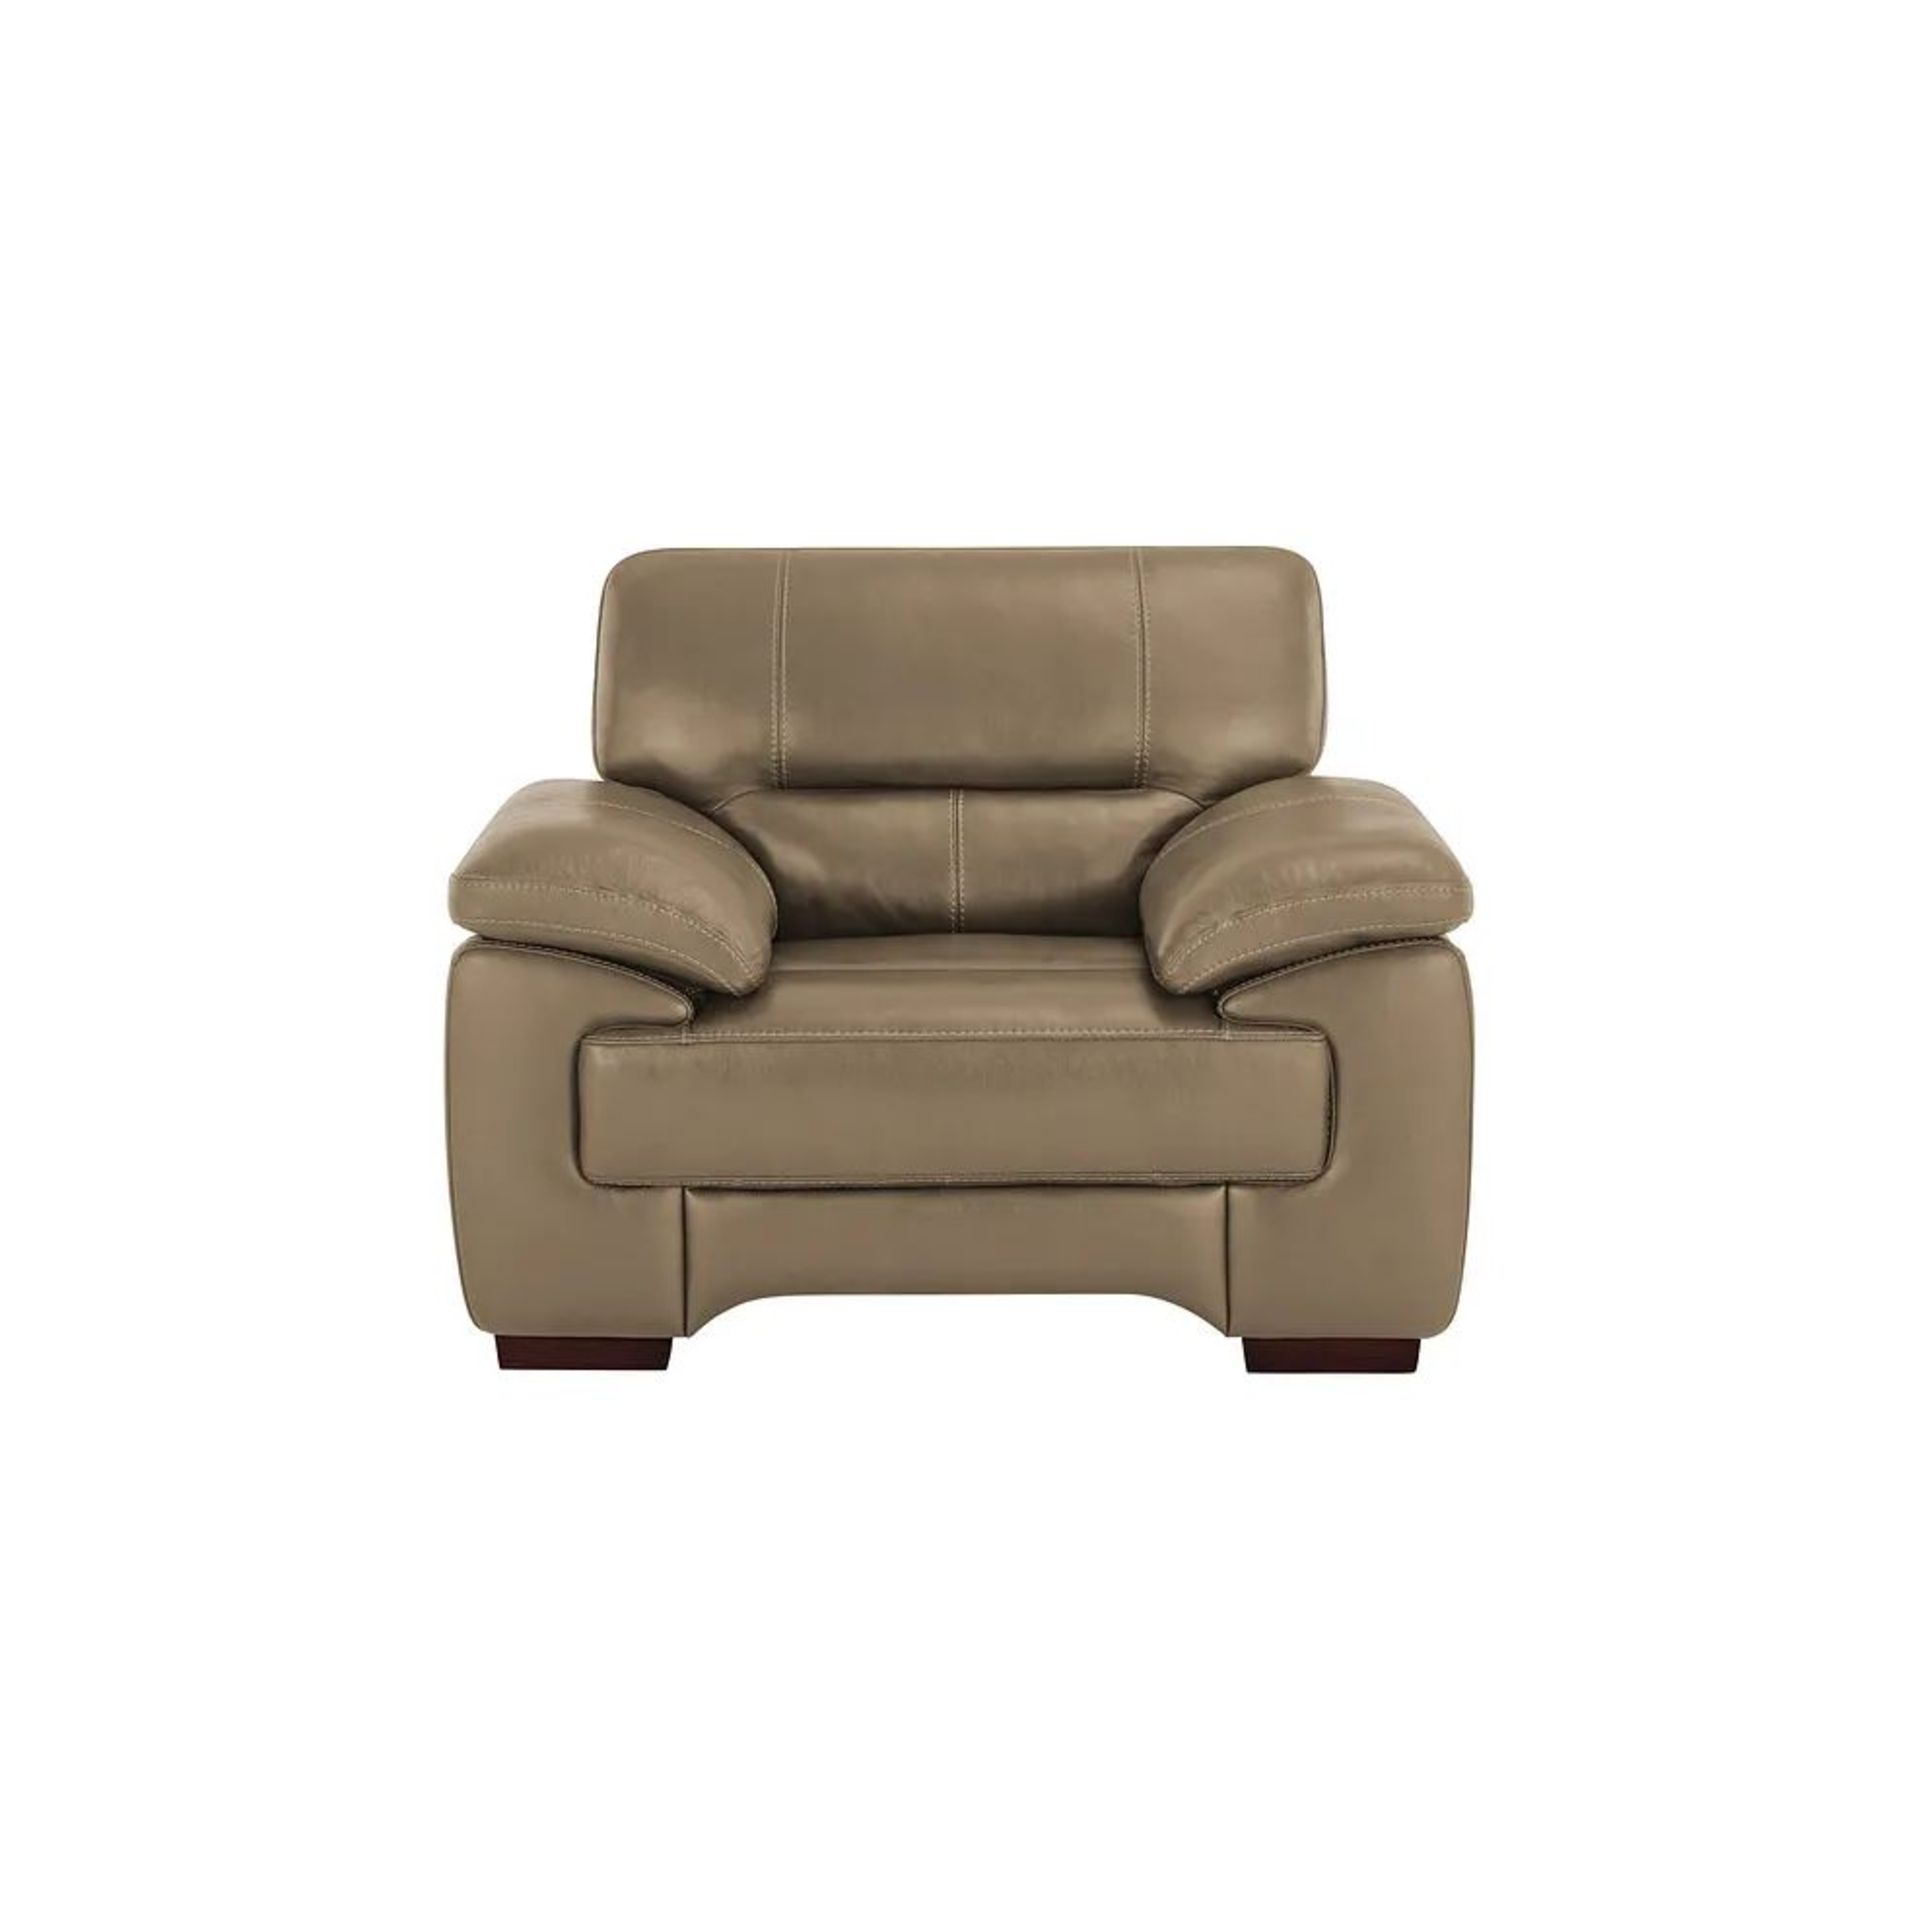 BRAND NEW ARLINGTON Armchair - BEIGE LEATHER. RRP £1099. Create a traditional and homely feel in - Bild 2 aus 9